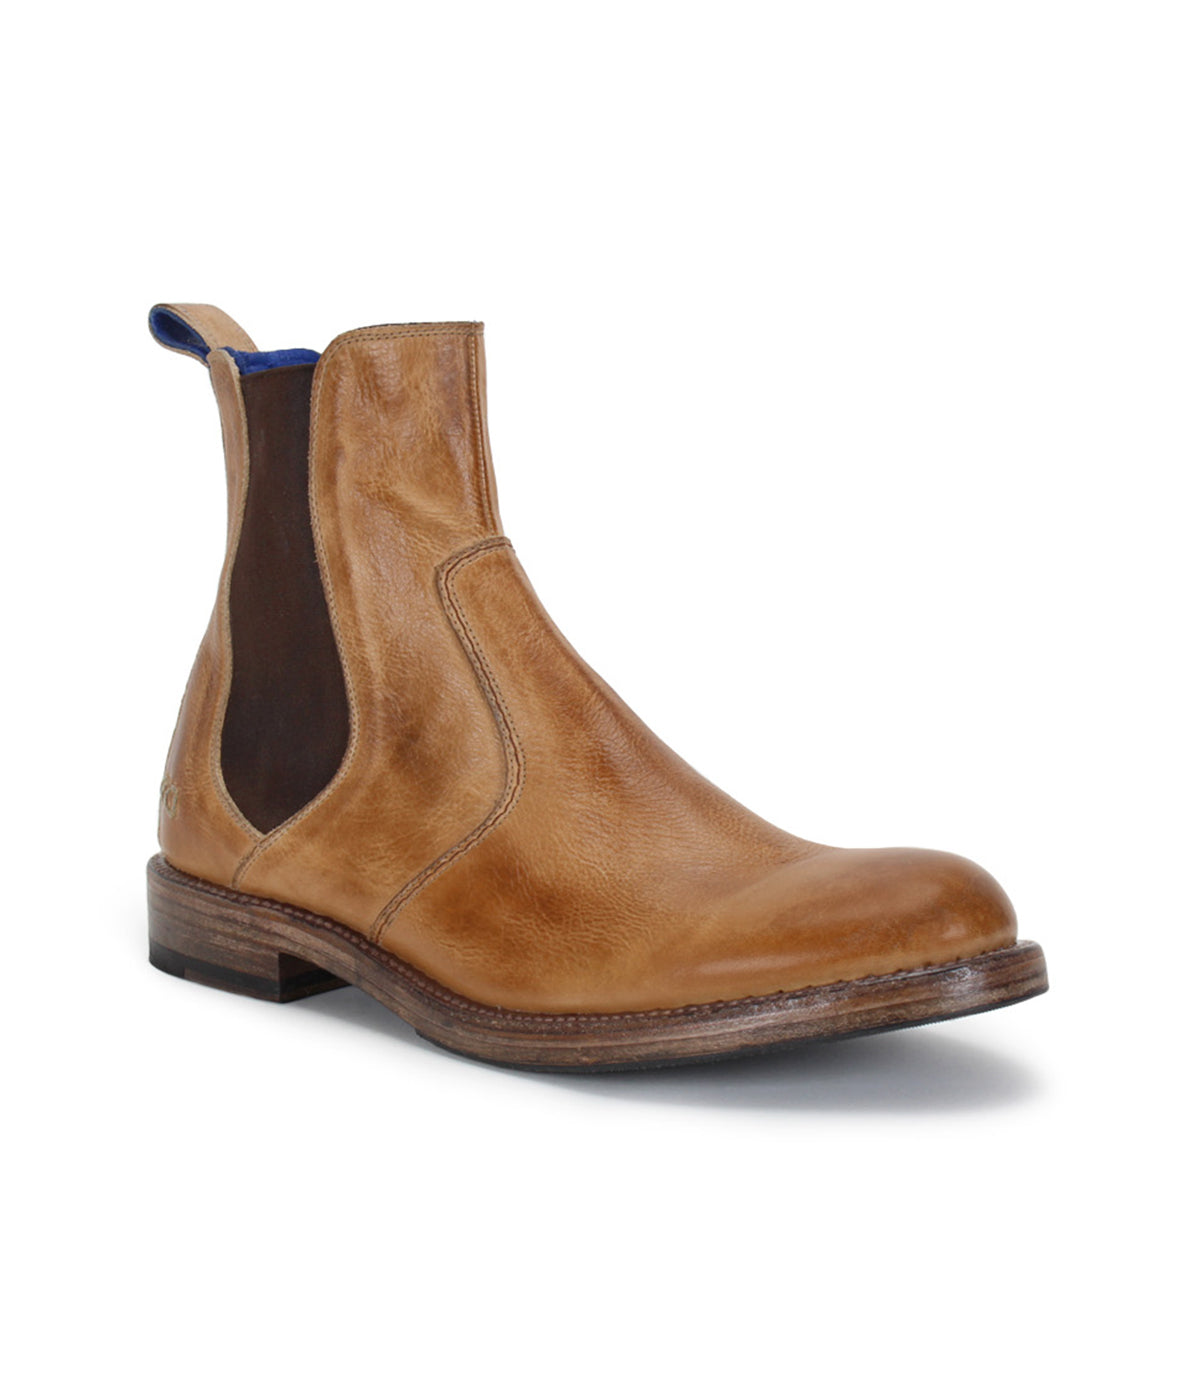 The Bed Stu men's leather Chelsea boots.